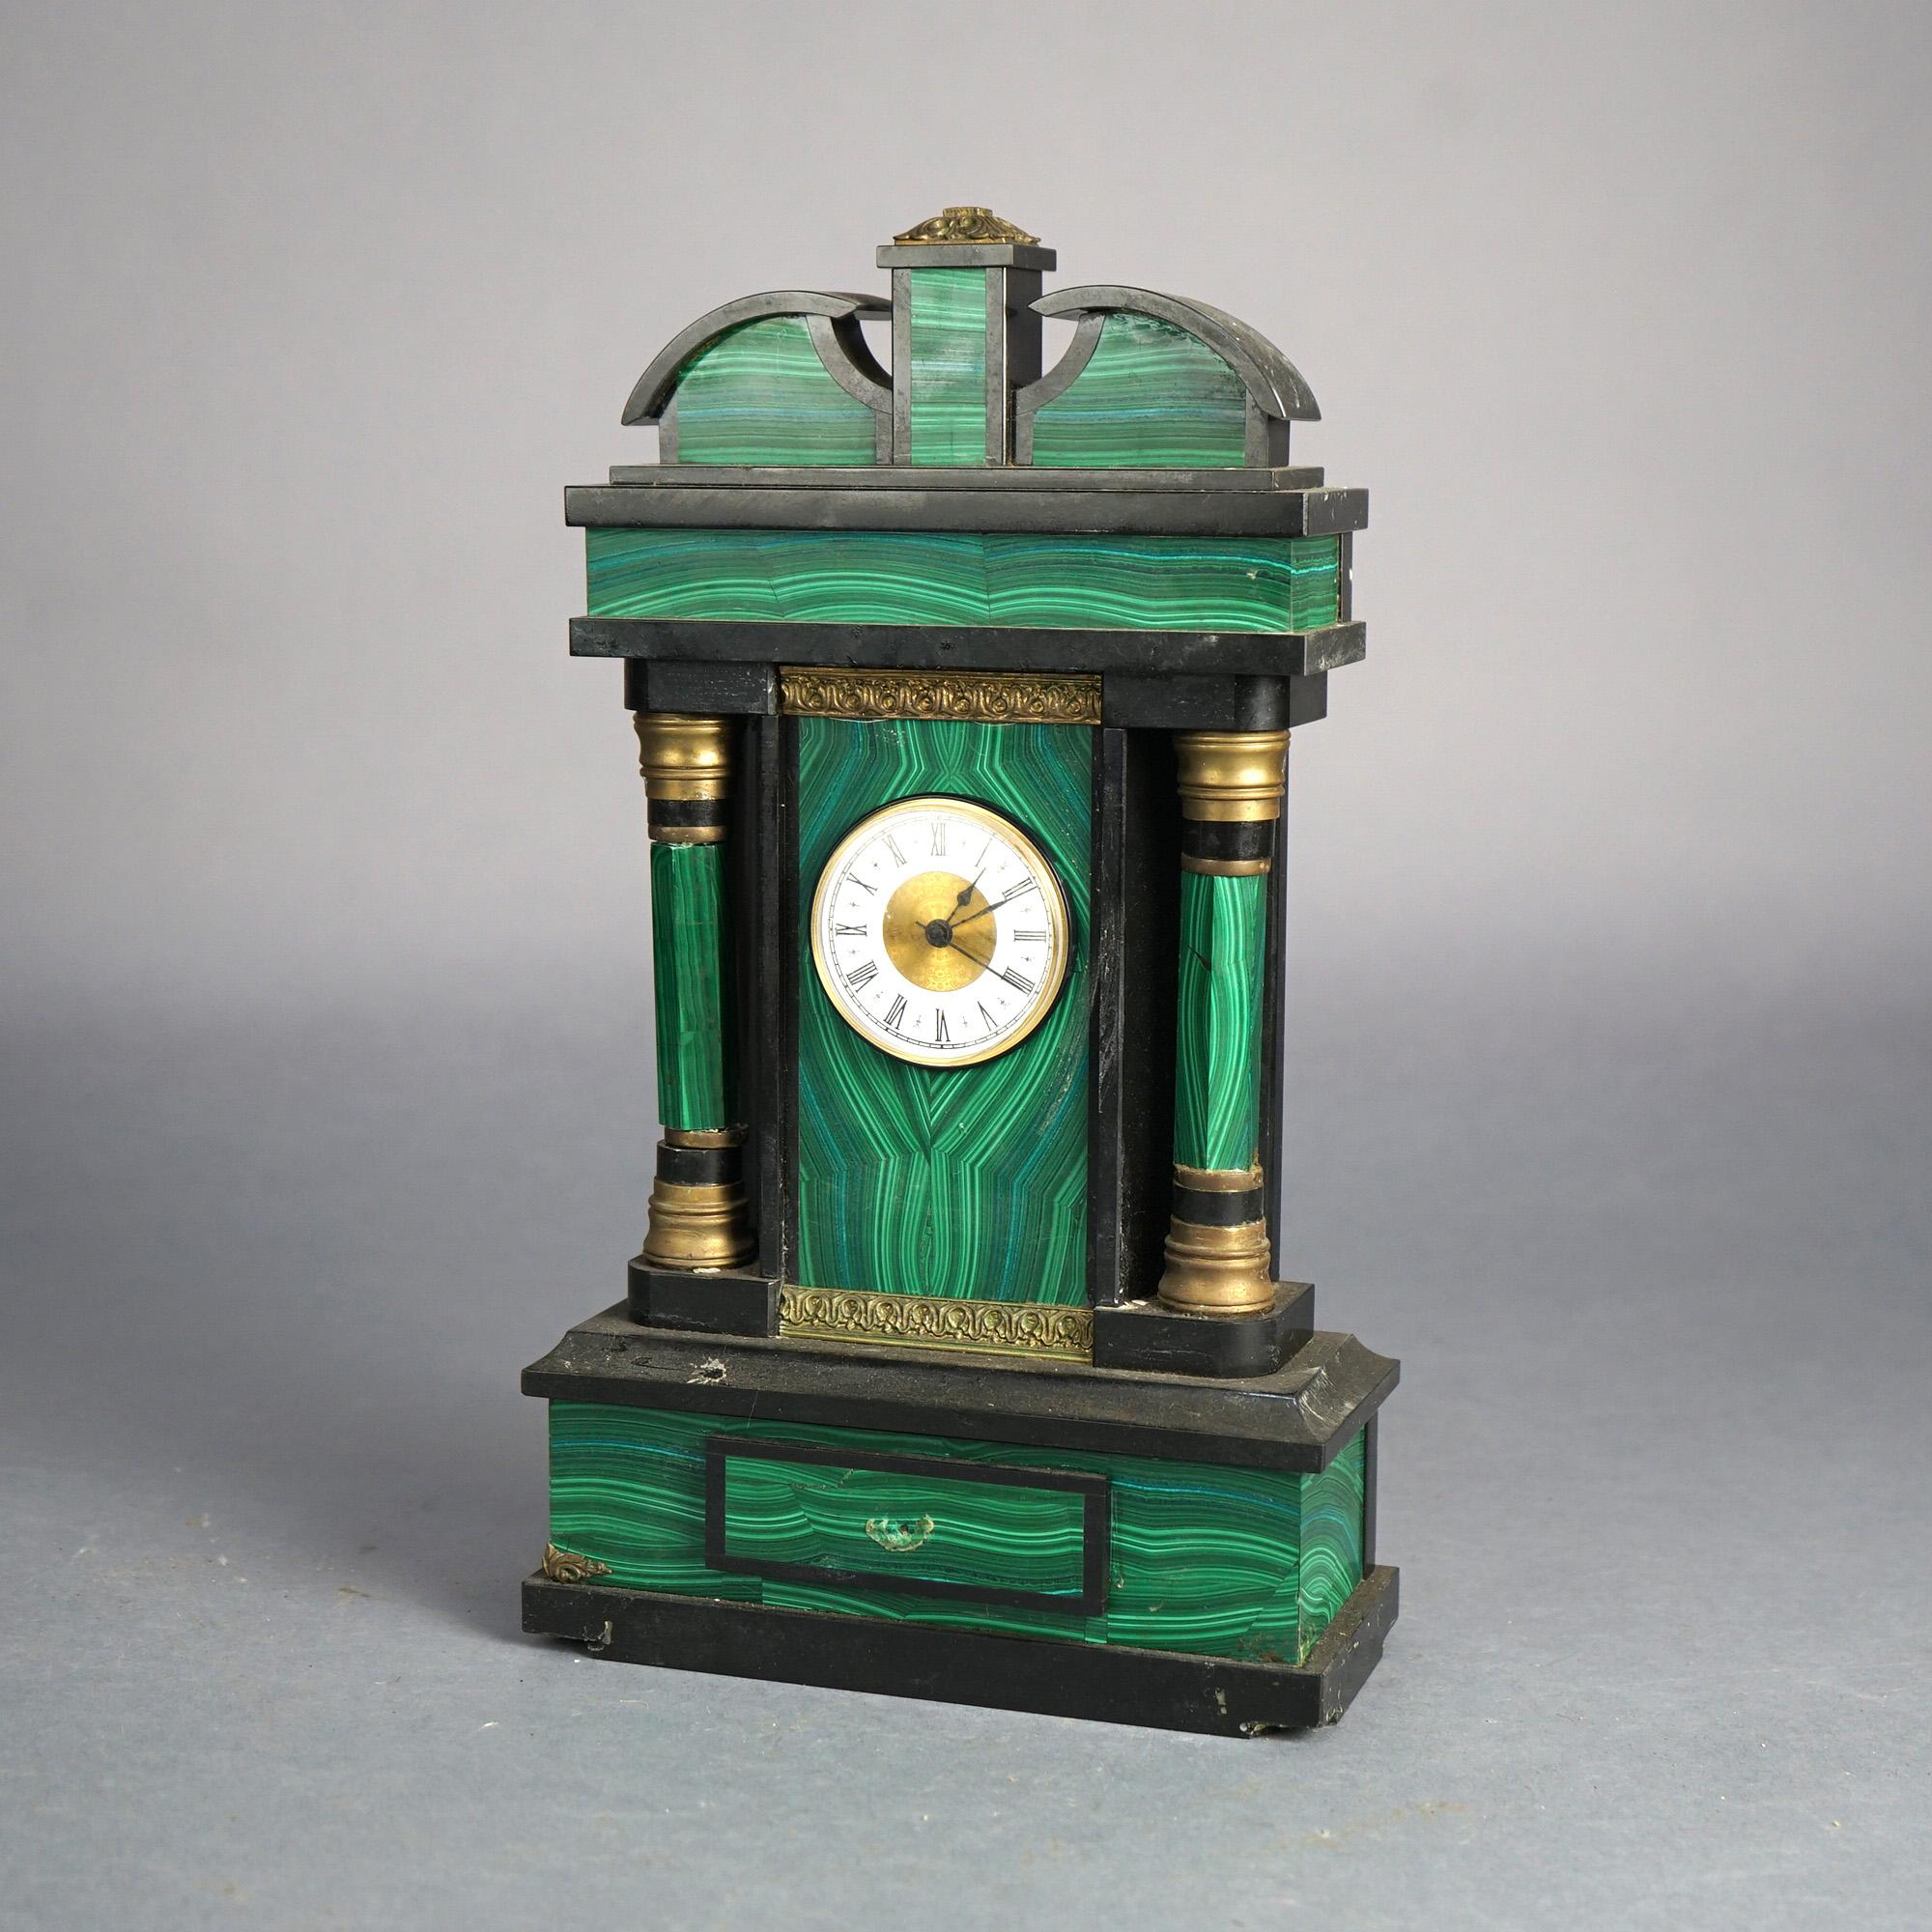 Antique French Empire Style Slate and Malachite Clock with Broken Arch Crest and Doric Columns, 19thC

Measures- 14.5''H x 8.25''W x 3.5''D